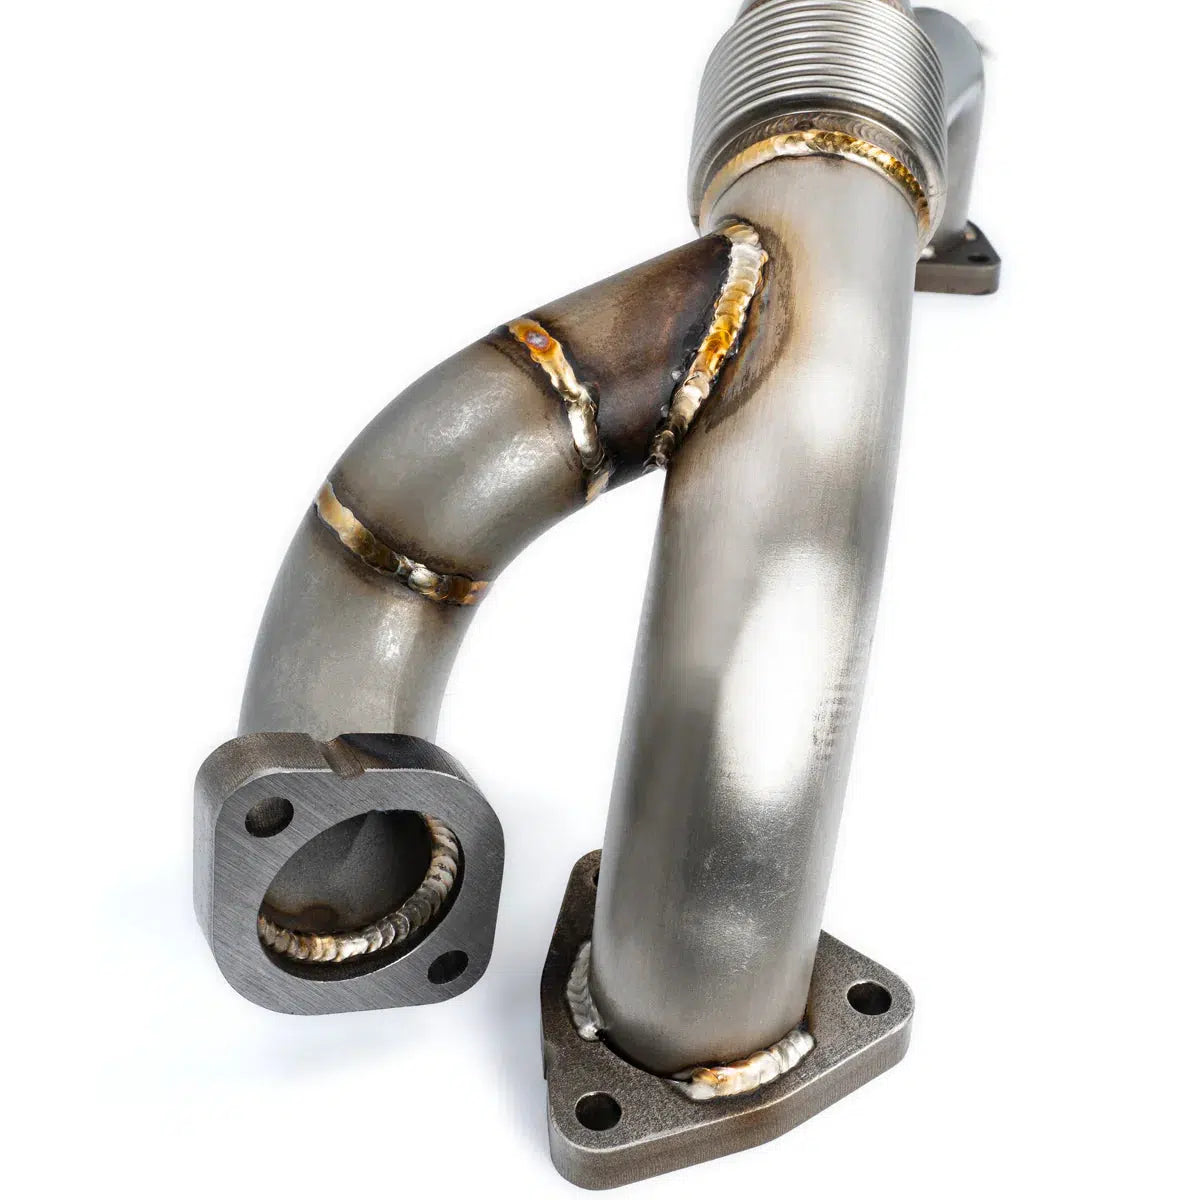 2008-2010 Powerstroke OEM Replacement Up-Pipes (316119508)-Up-Pipes-PPE-316119508-Dirty Diesel Customs